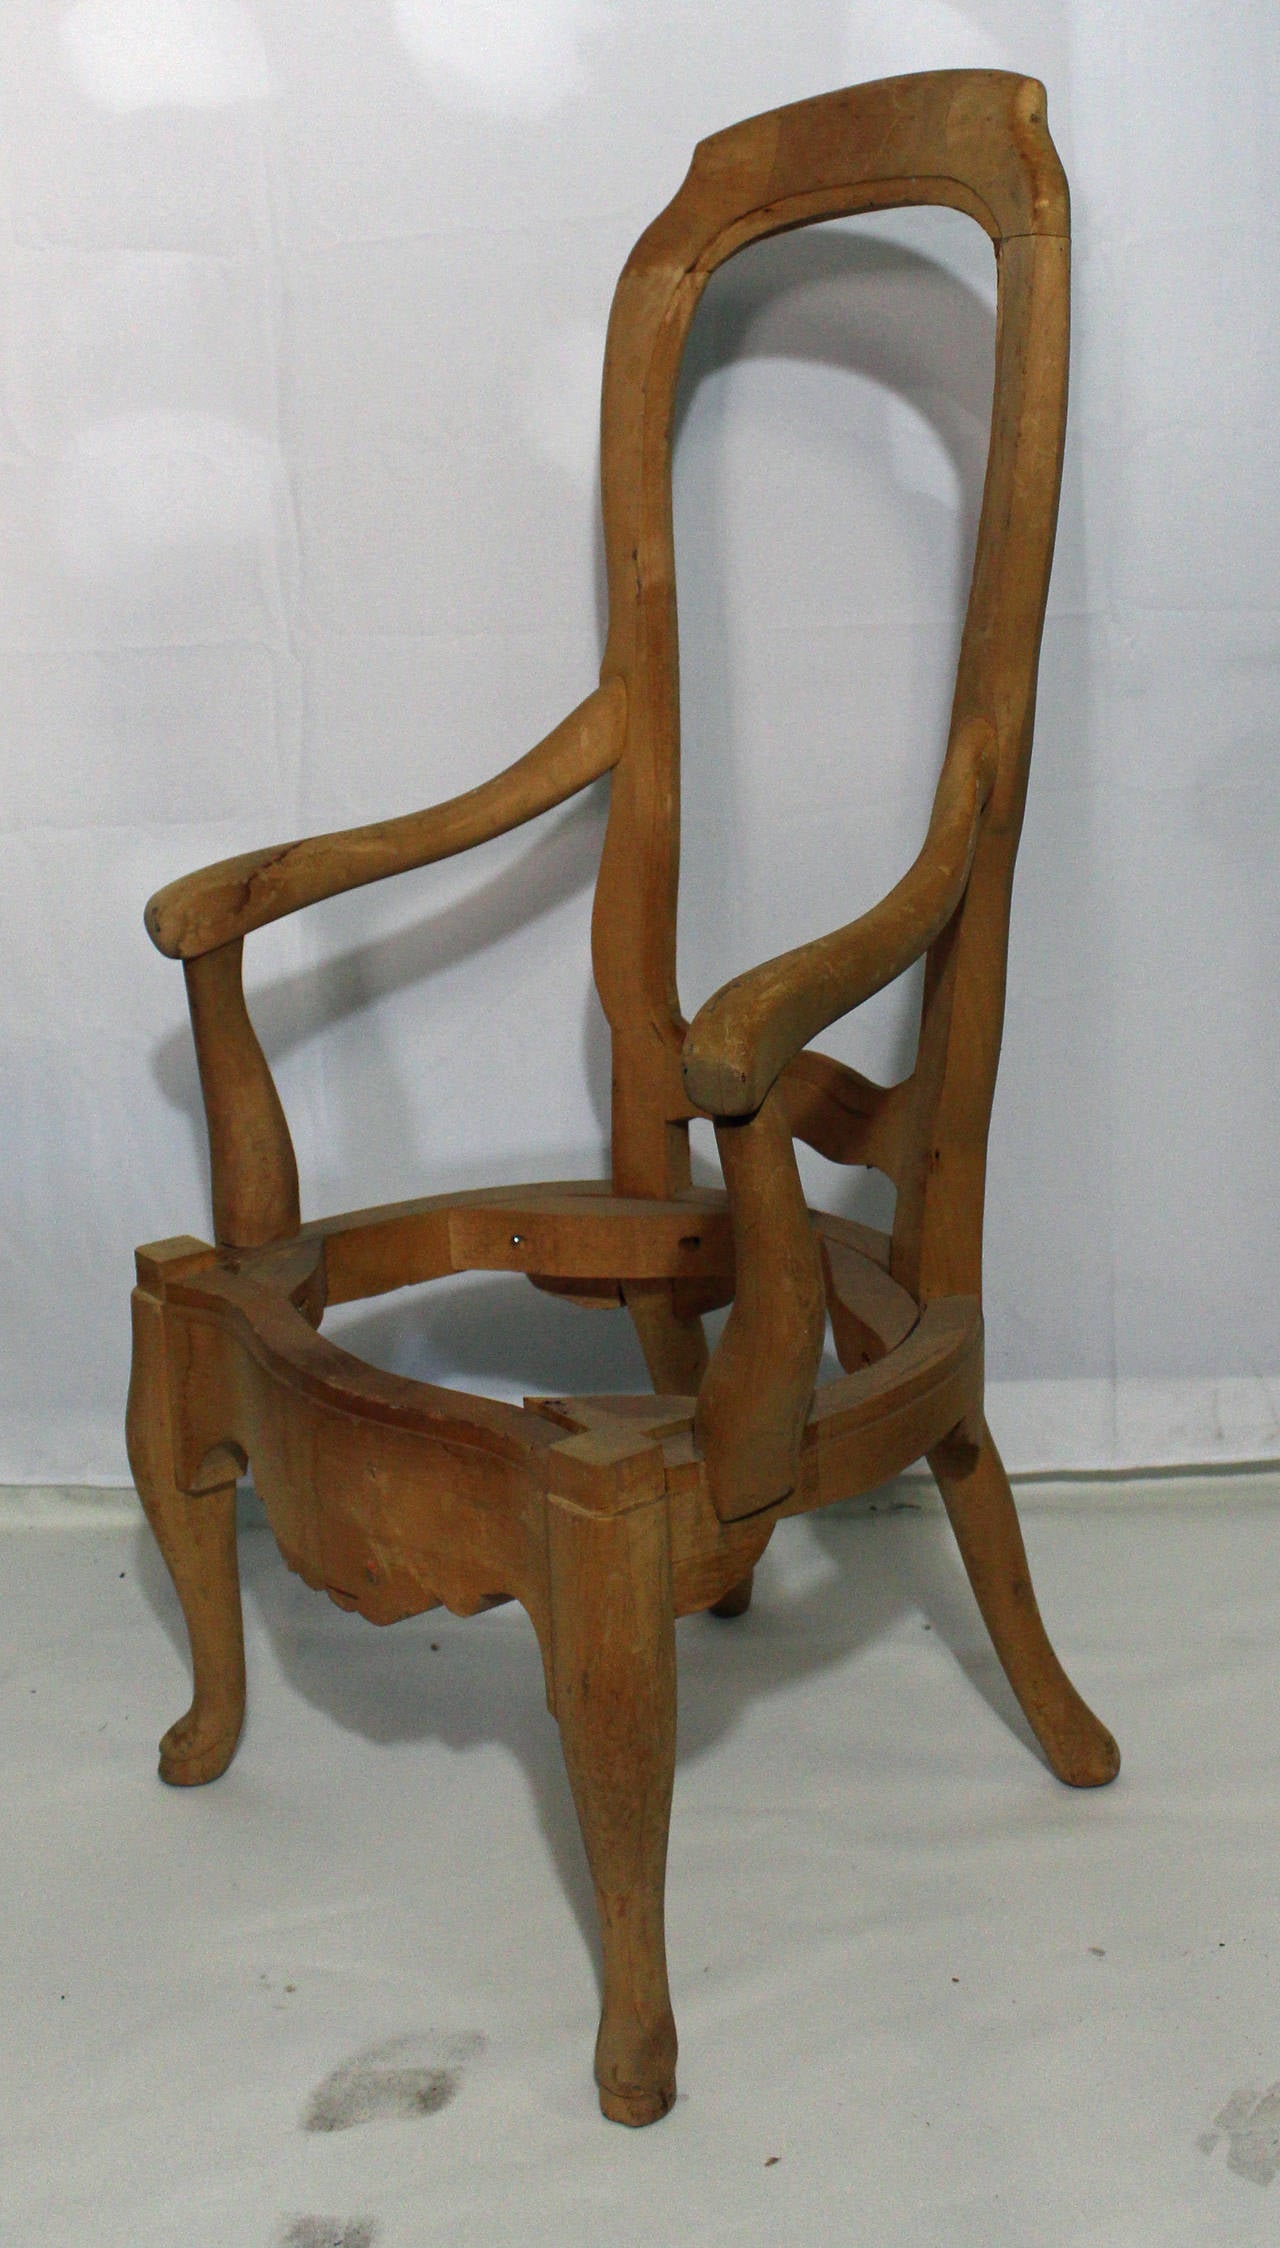 wooden chair frames for sale